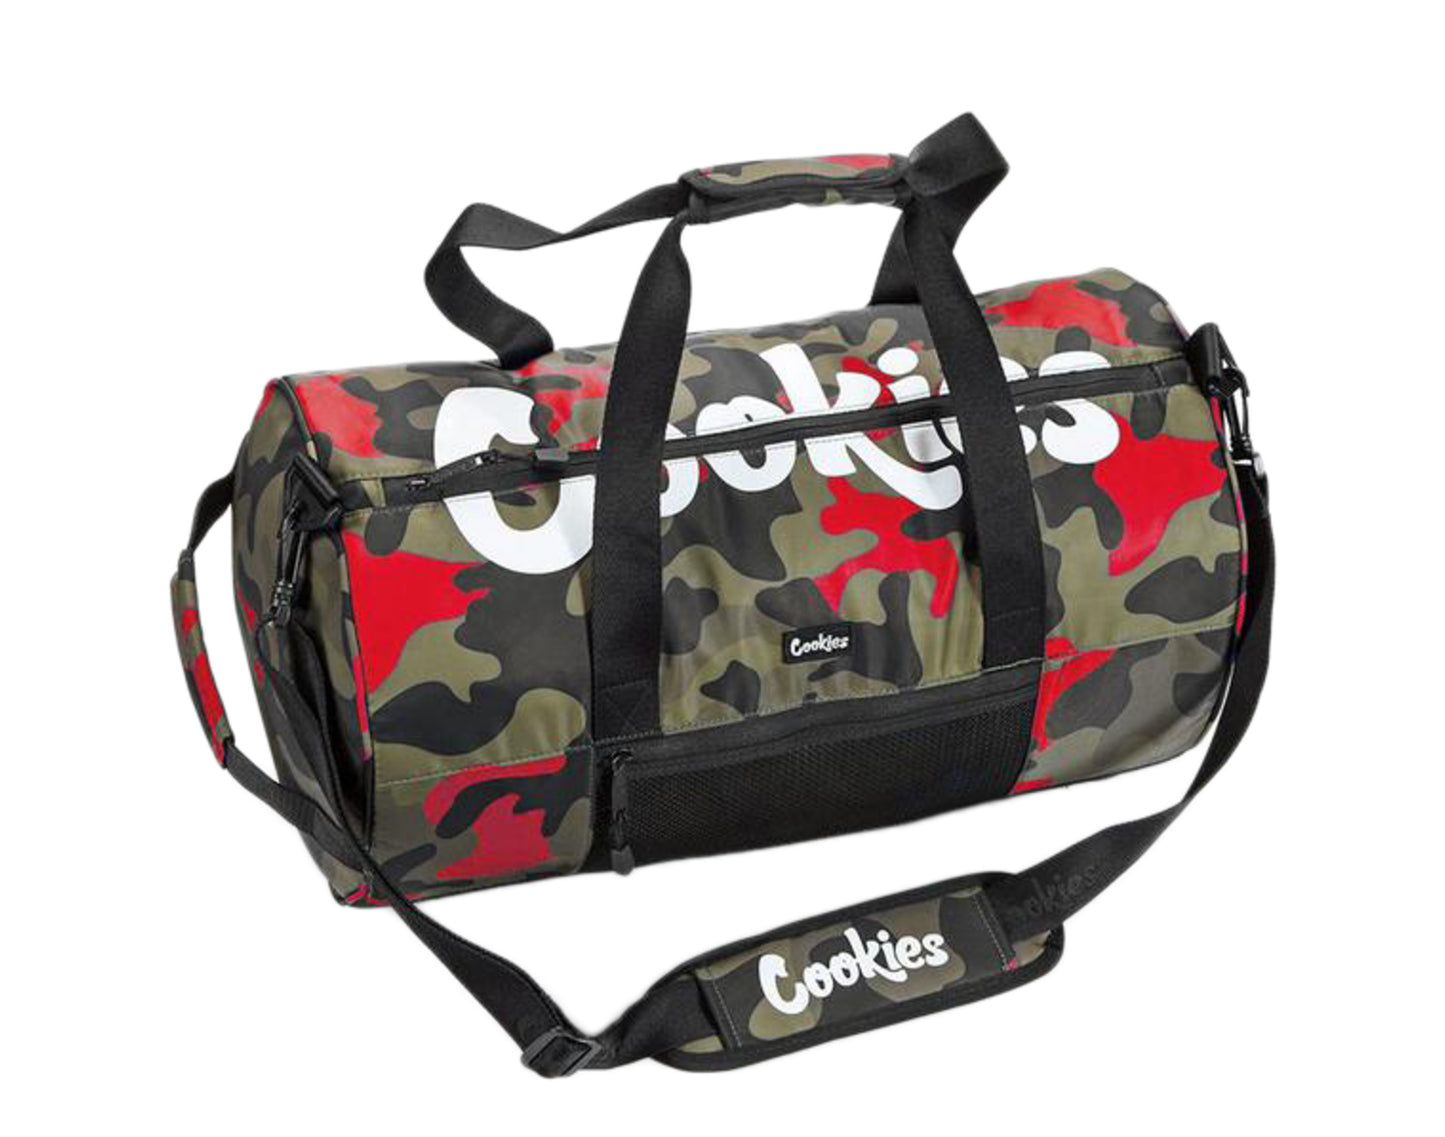 Cookies Summit Ripstop Smell Proof Red Camo Duffel Bag 1546A4418-RDC